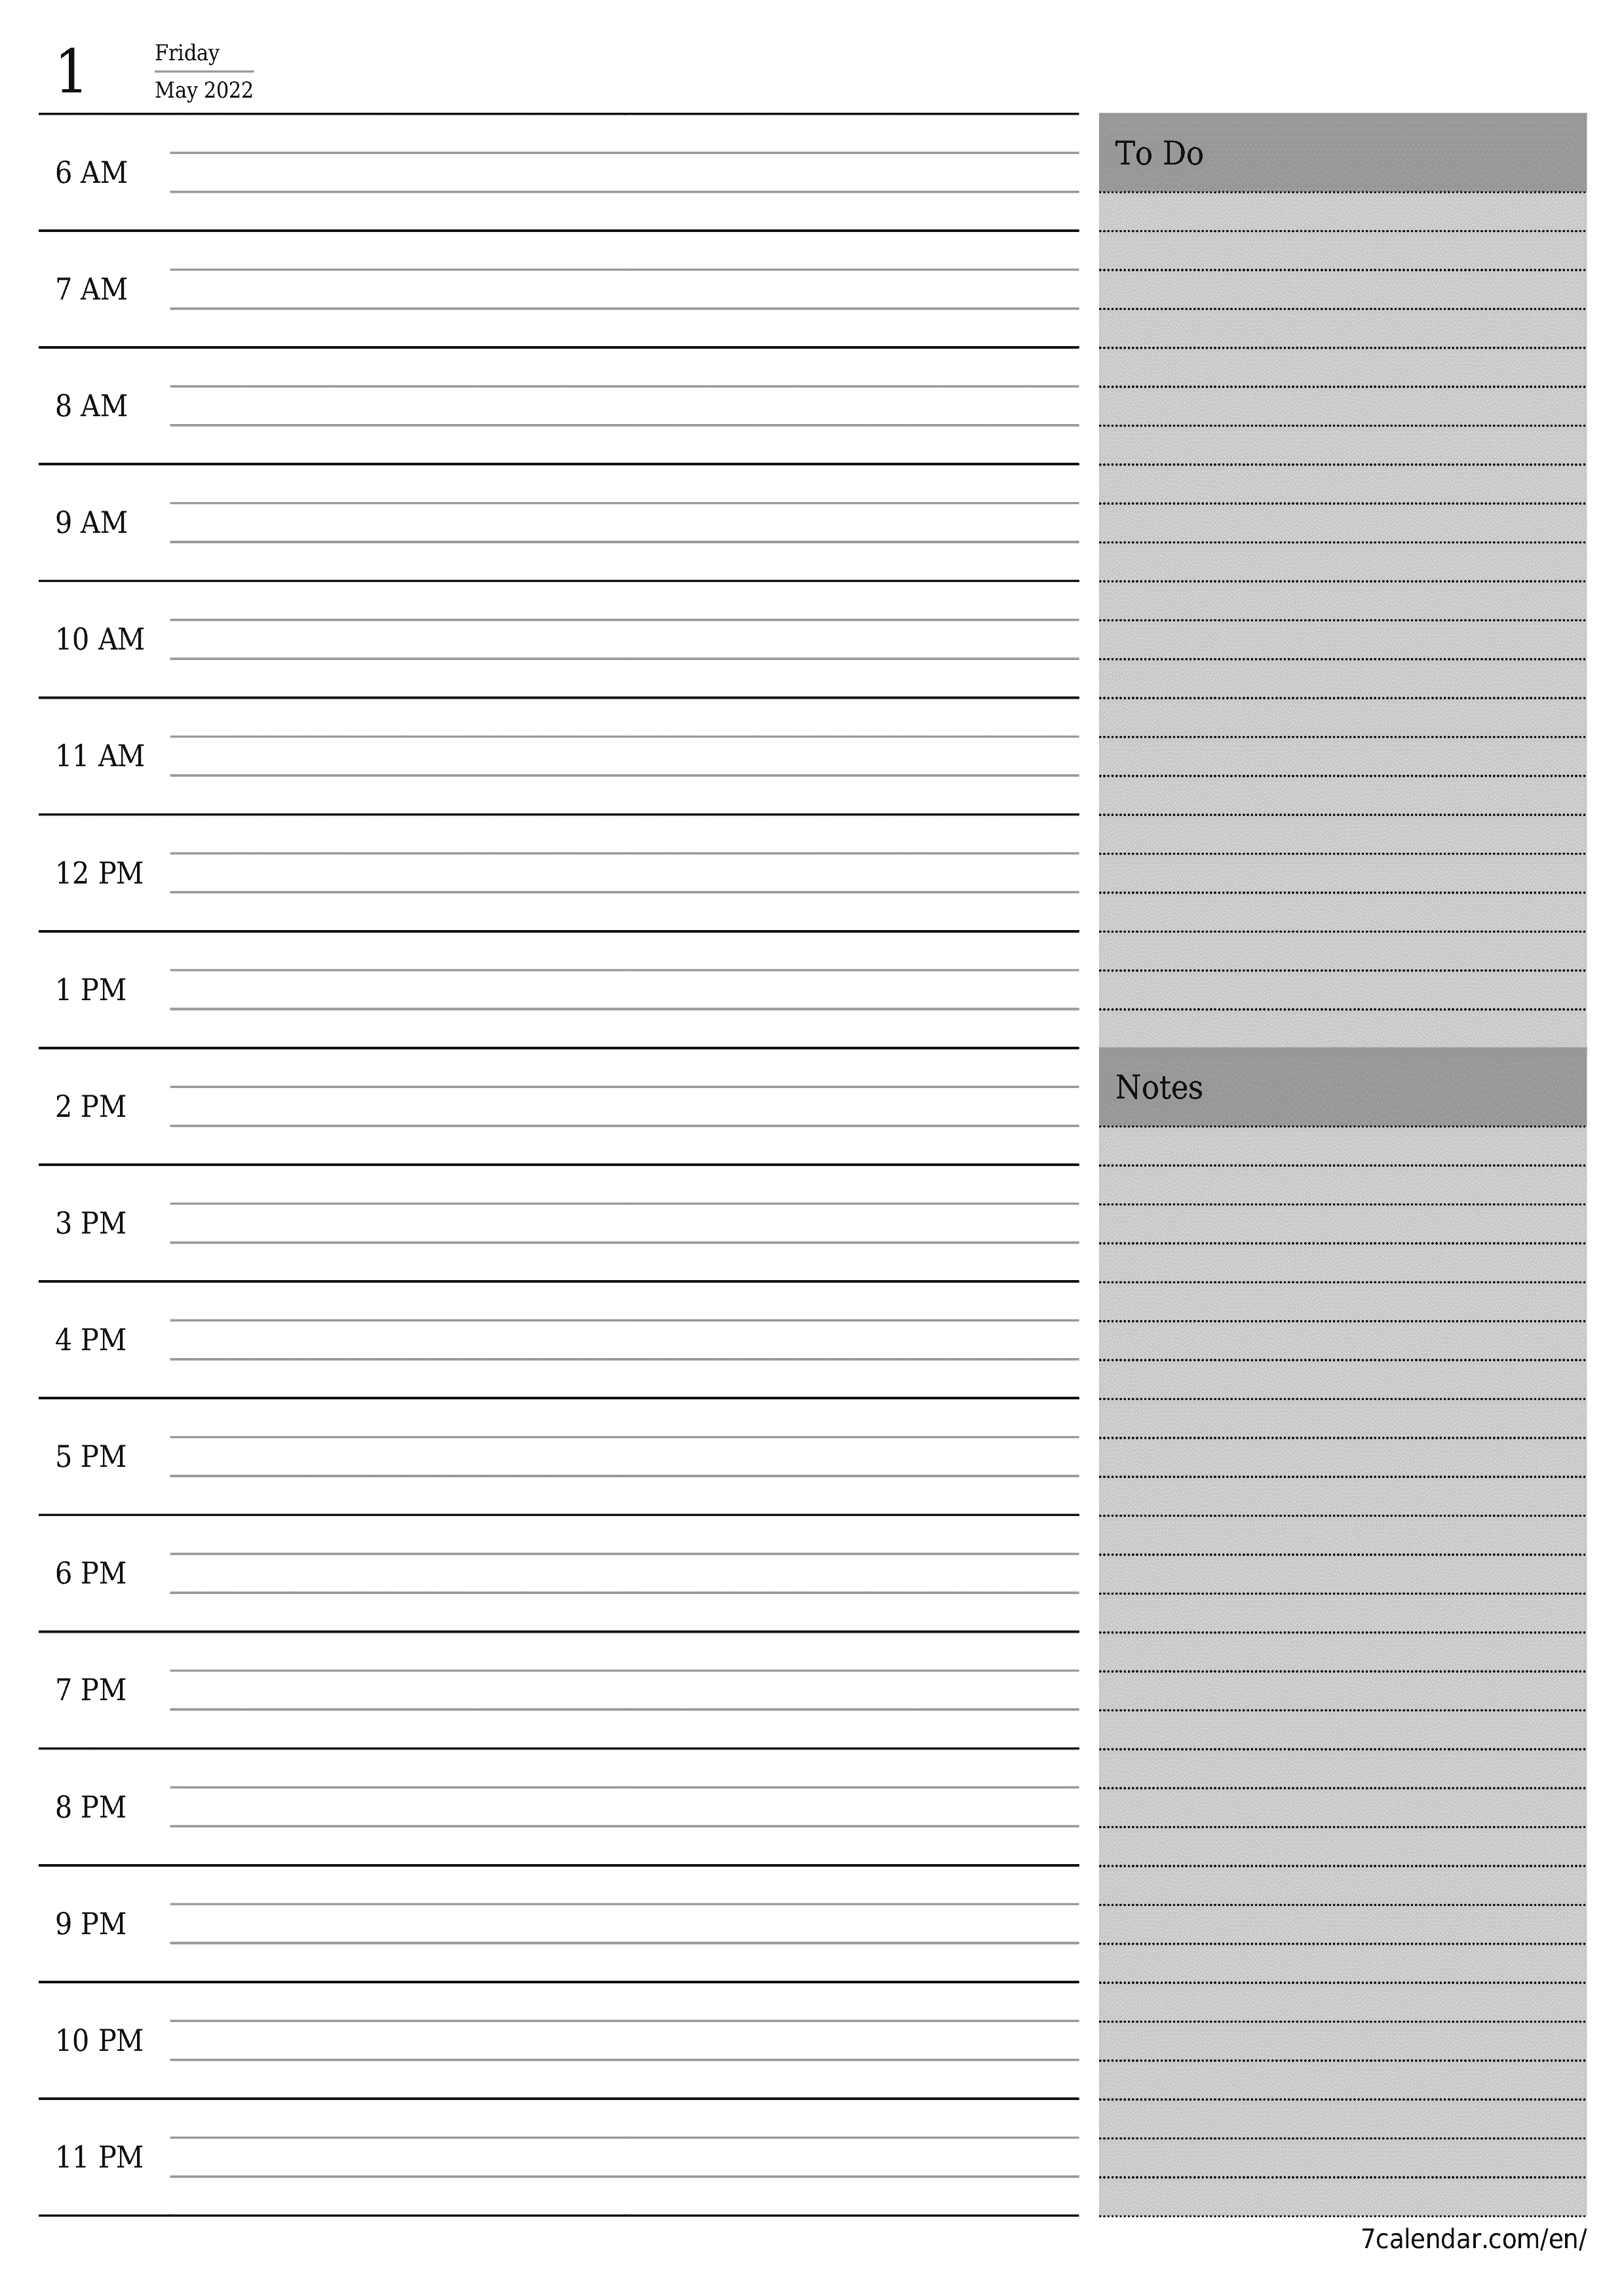 Blank daily printable calendar and planner for day May 2022 with notes, save and print to PDF PNG English